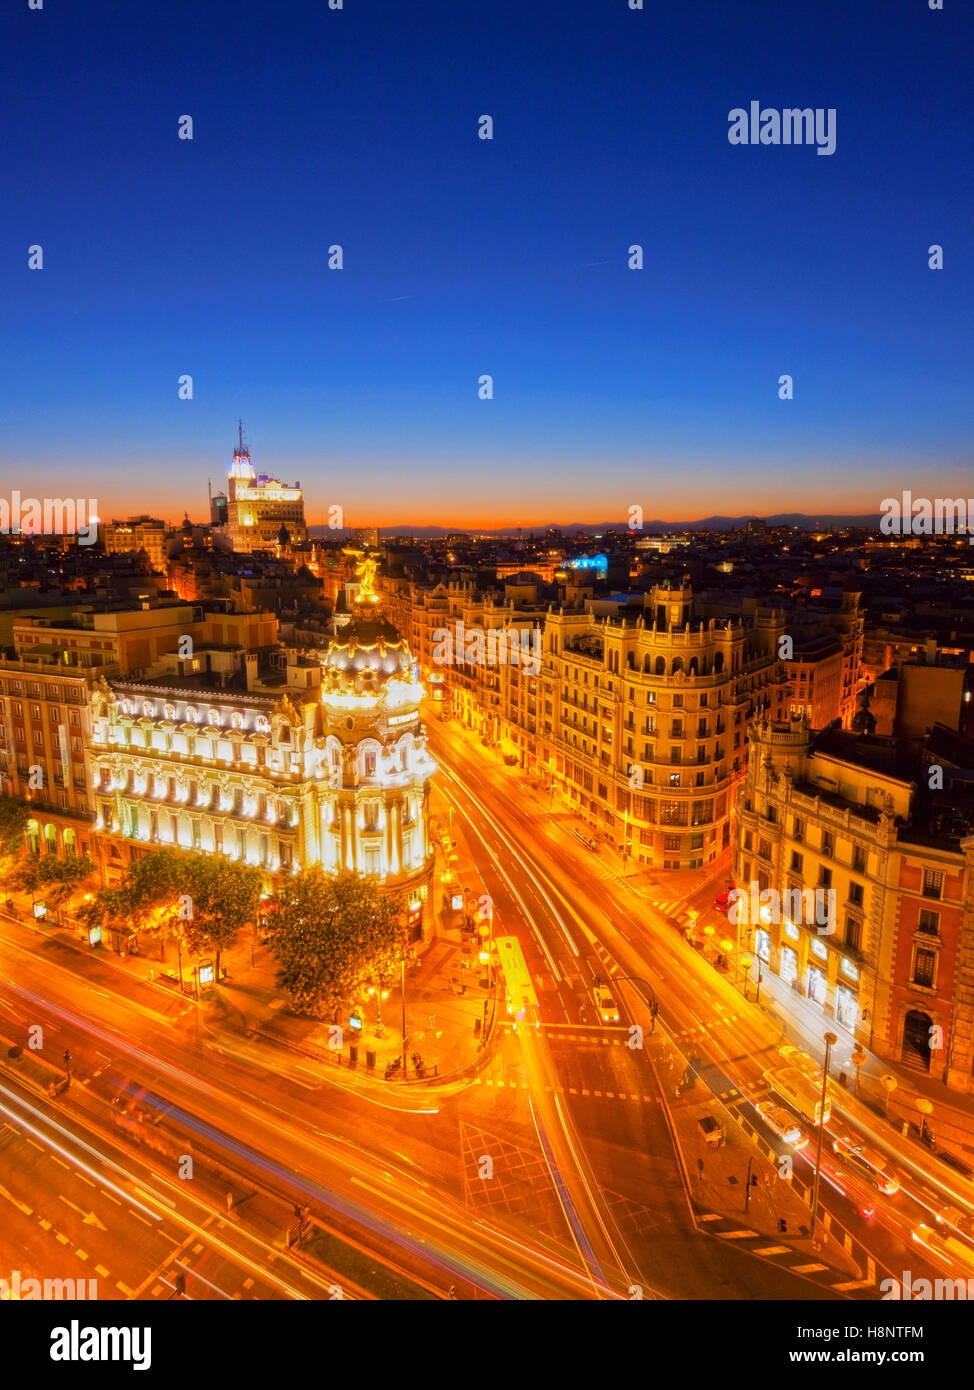 Spain, Madrid, Elevated view of the Metropolis Building. Stock Photo